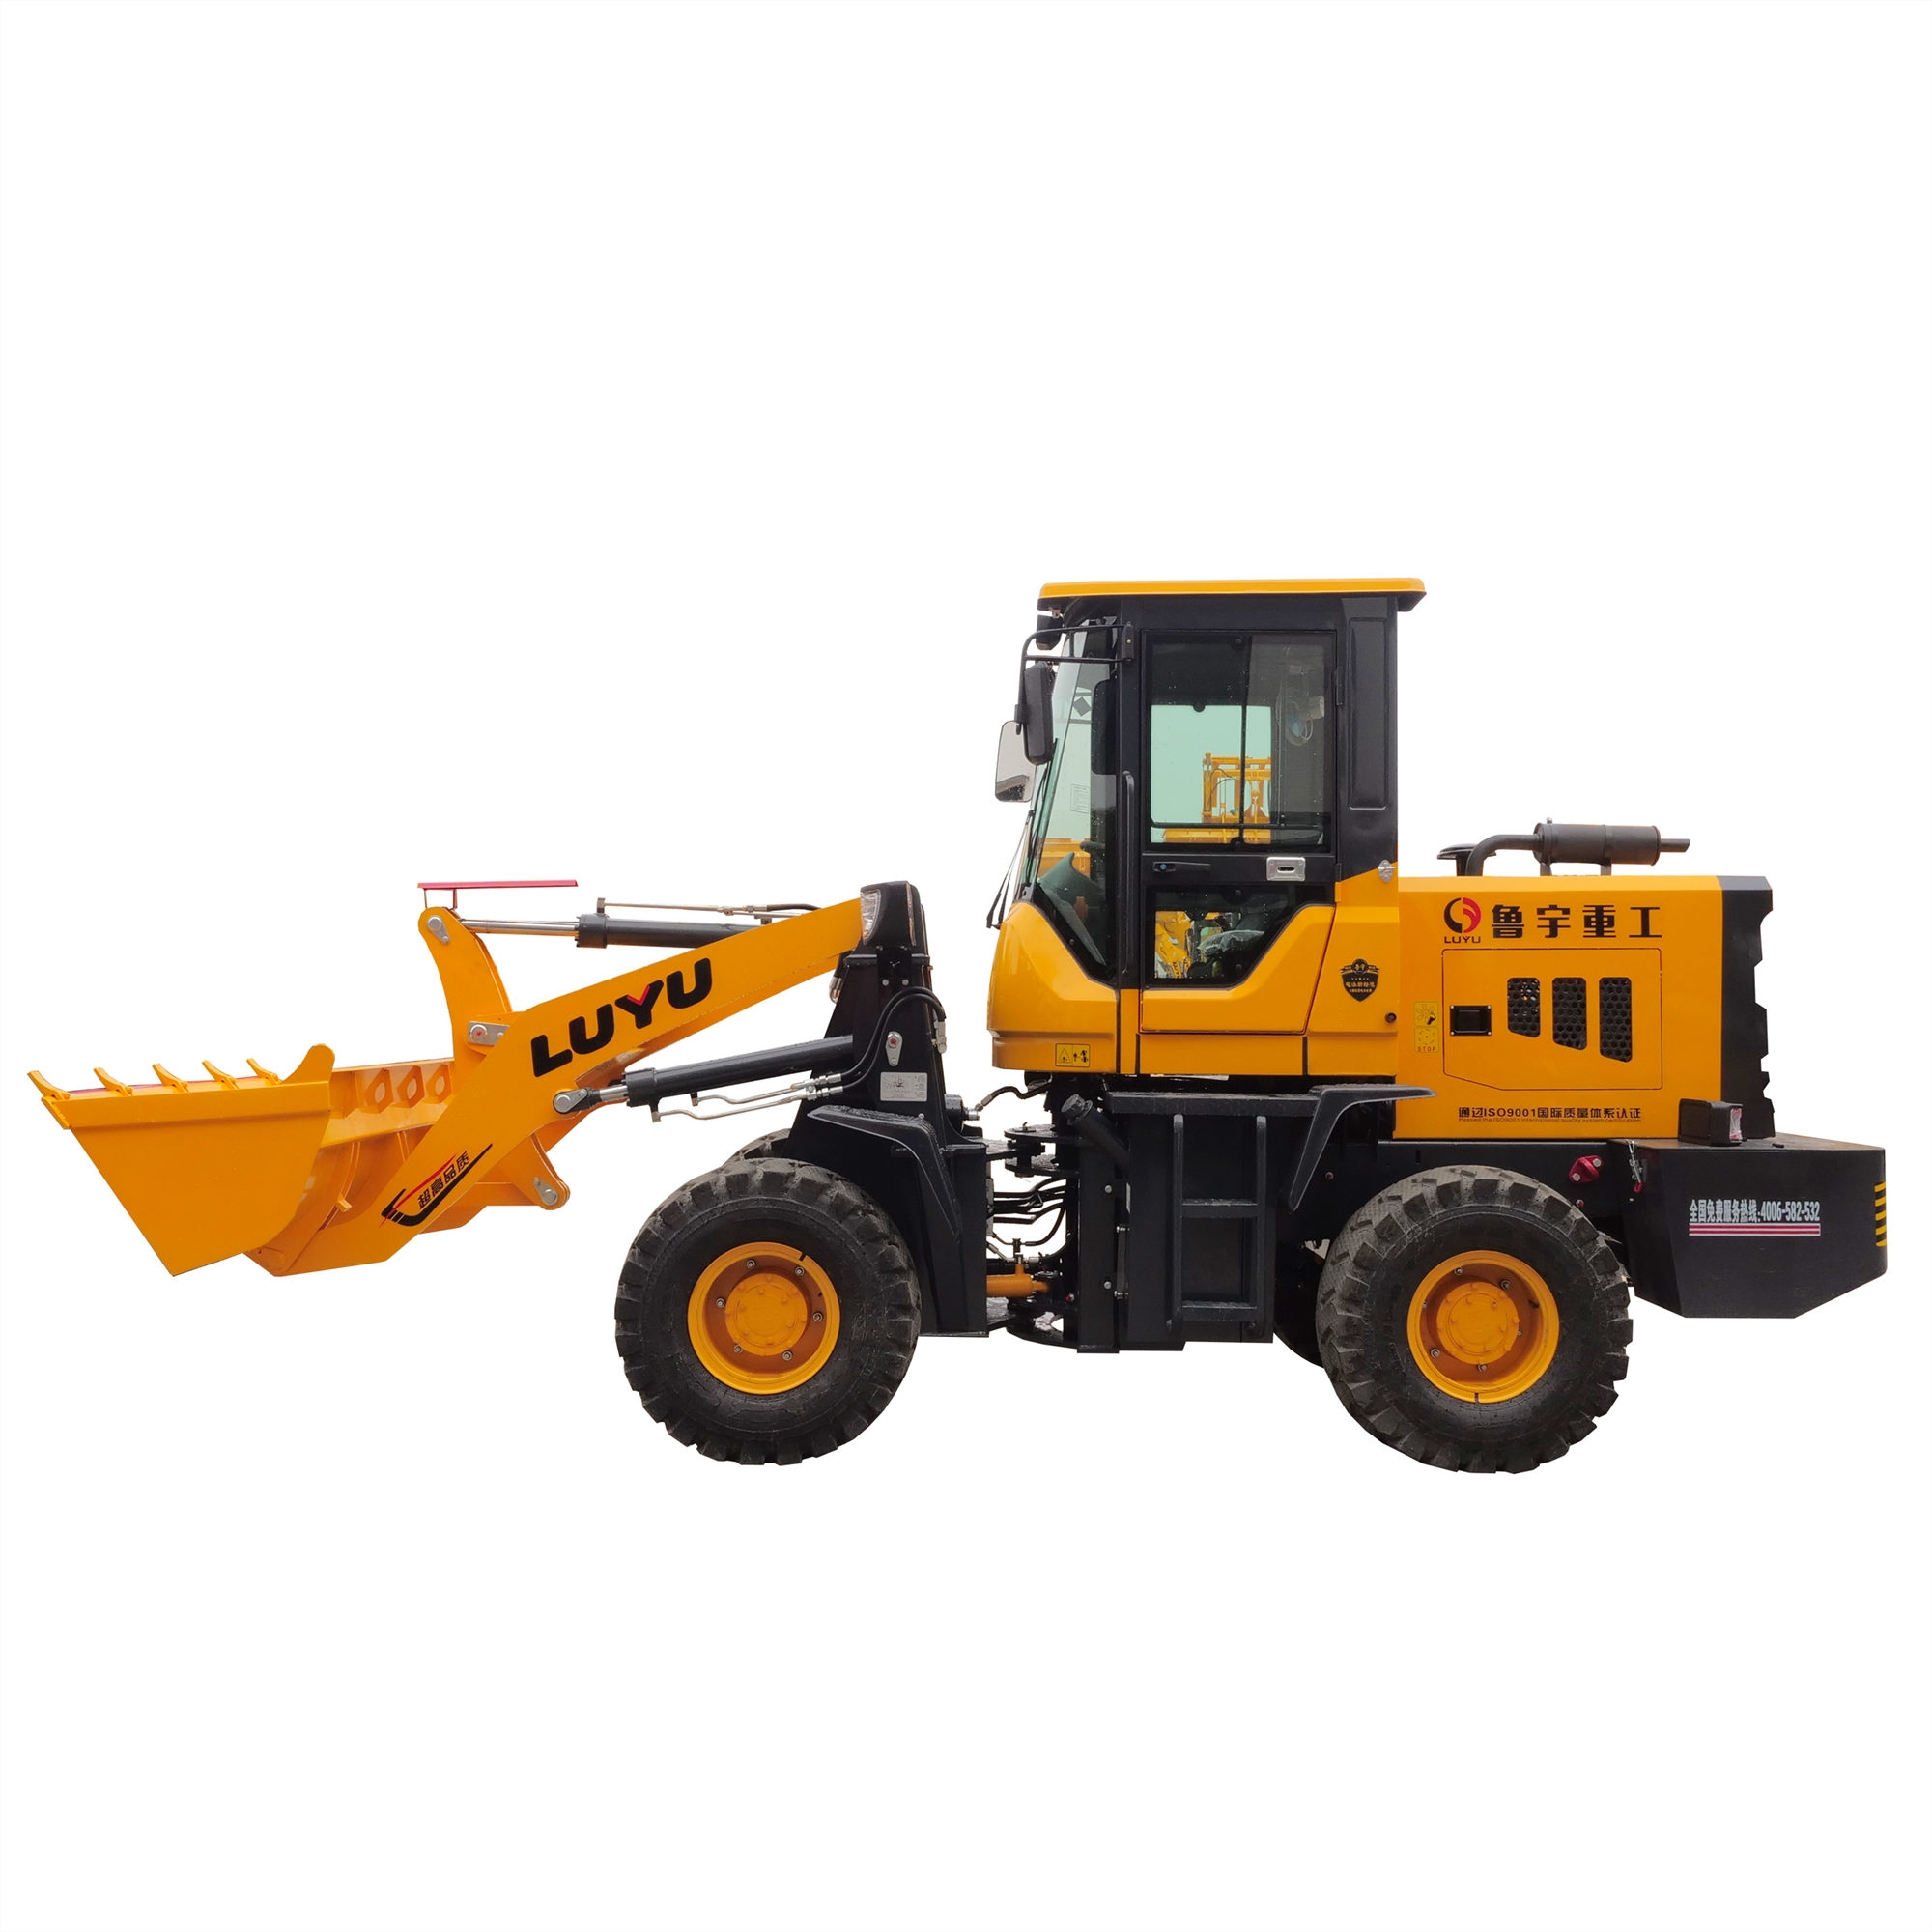 Constructions Compact Mini Wheel Loader with Grapple